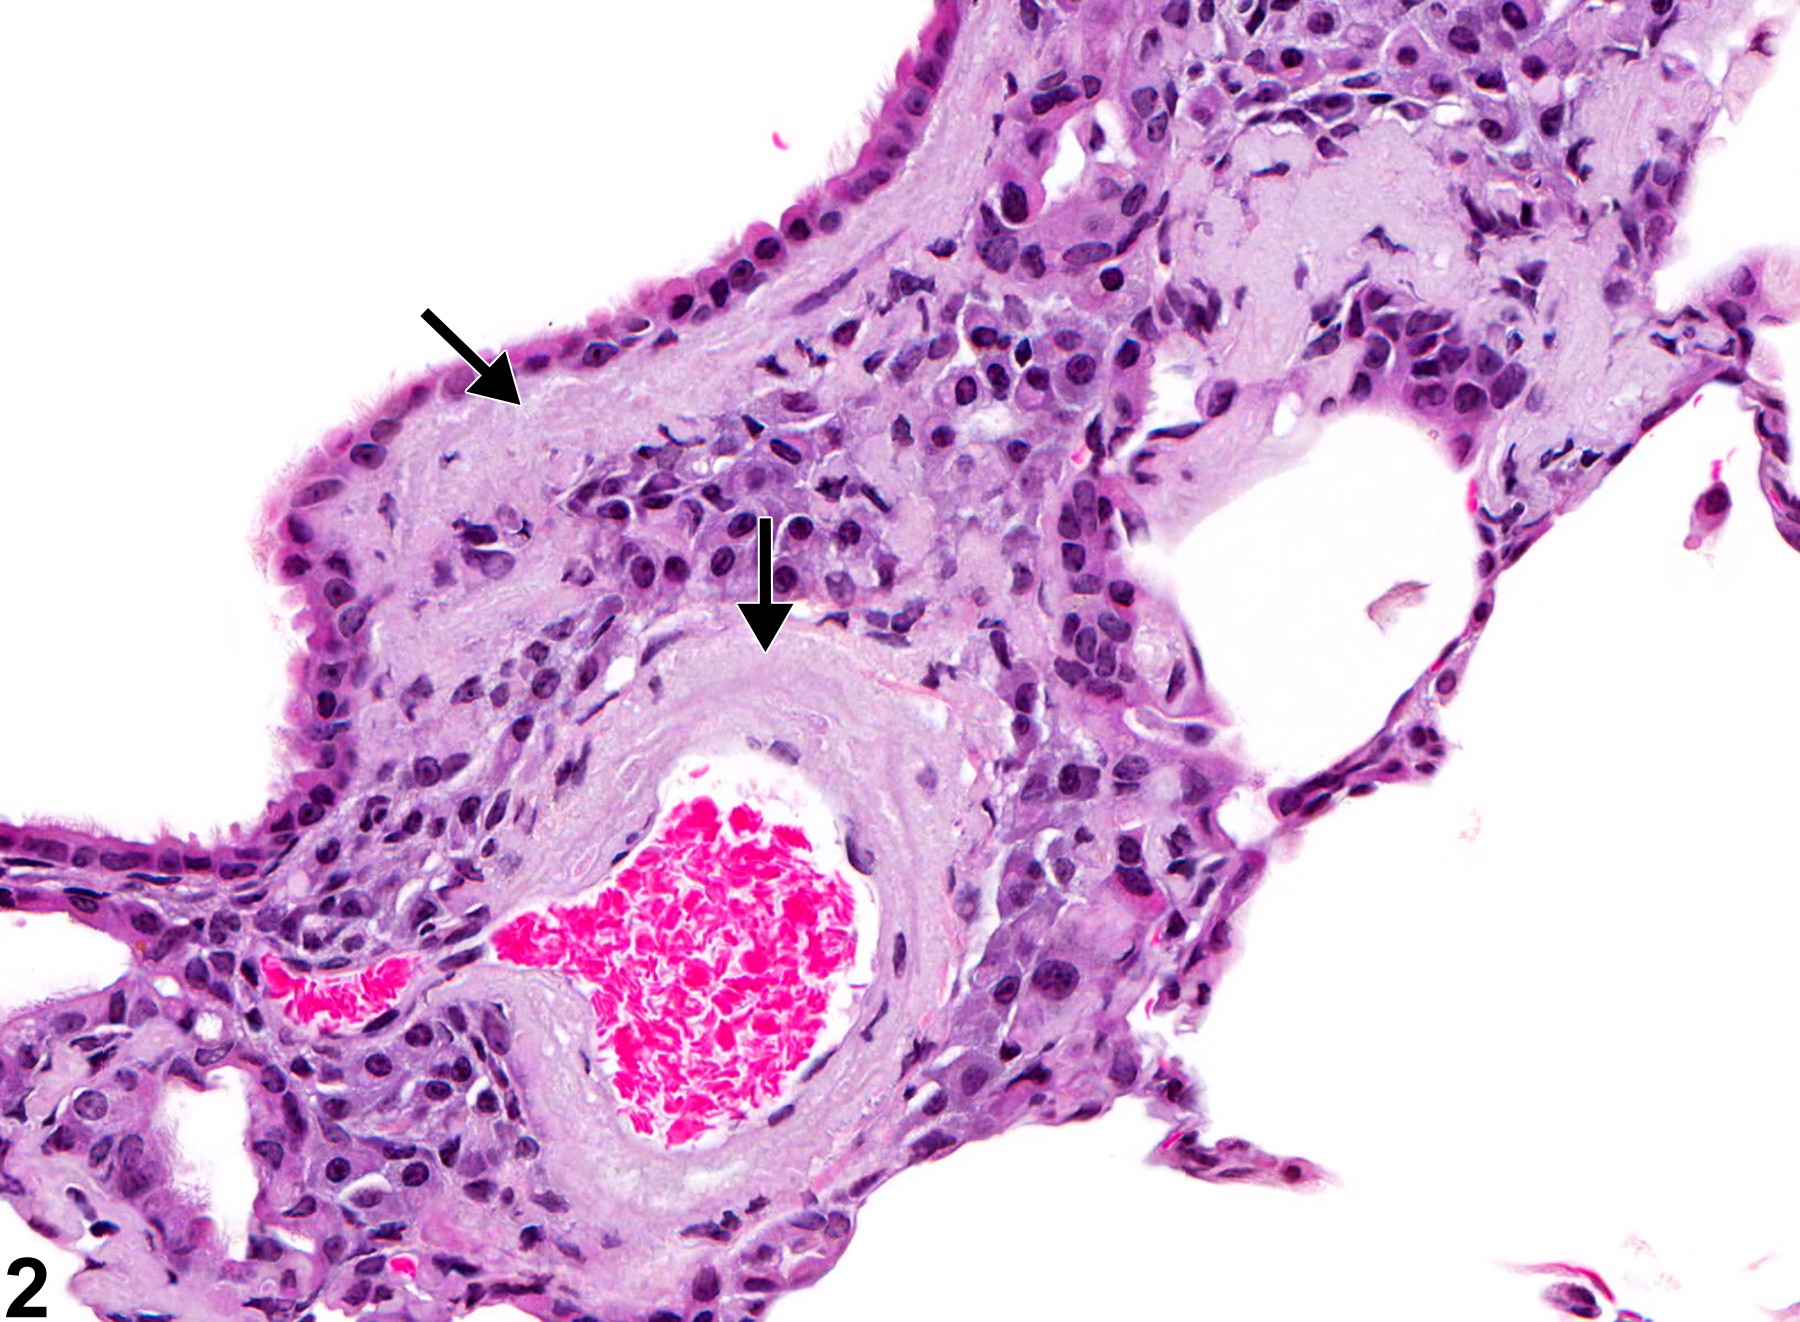 Image of amyloid in the lung from a female B6C3F1/N mouse in a chronic study